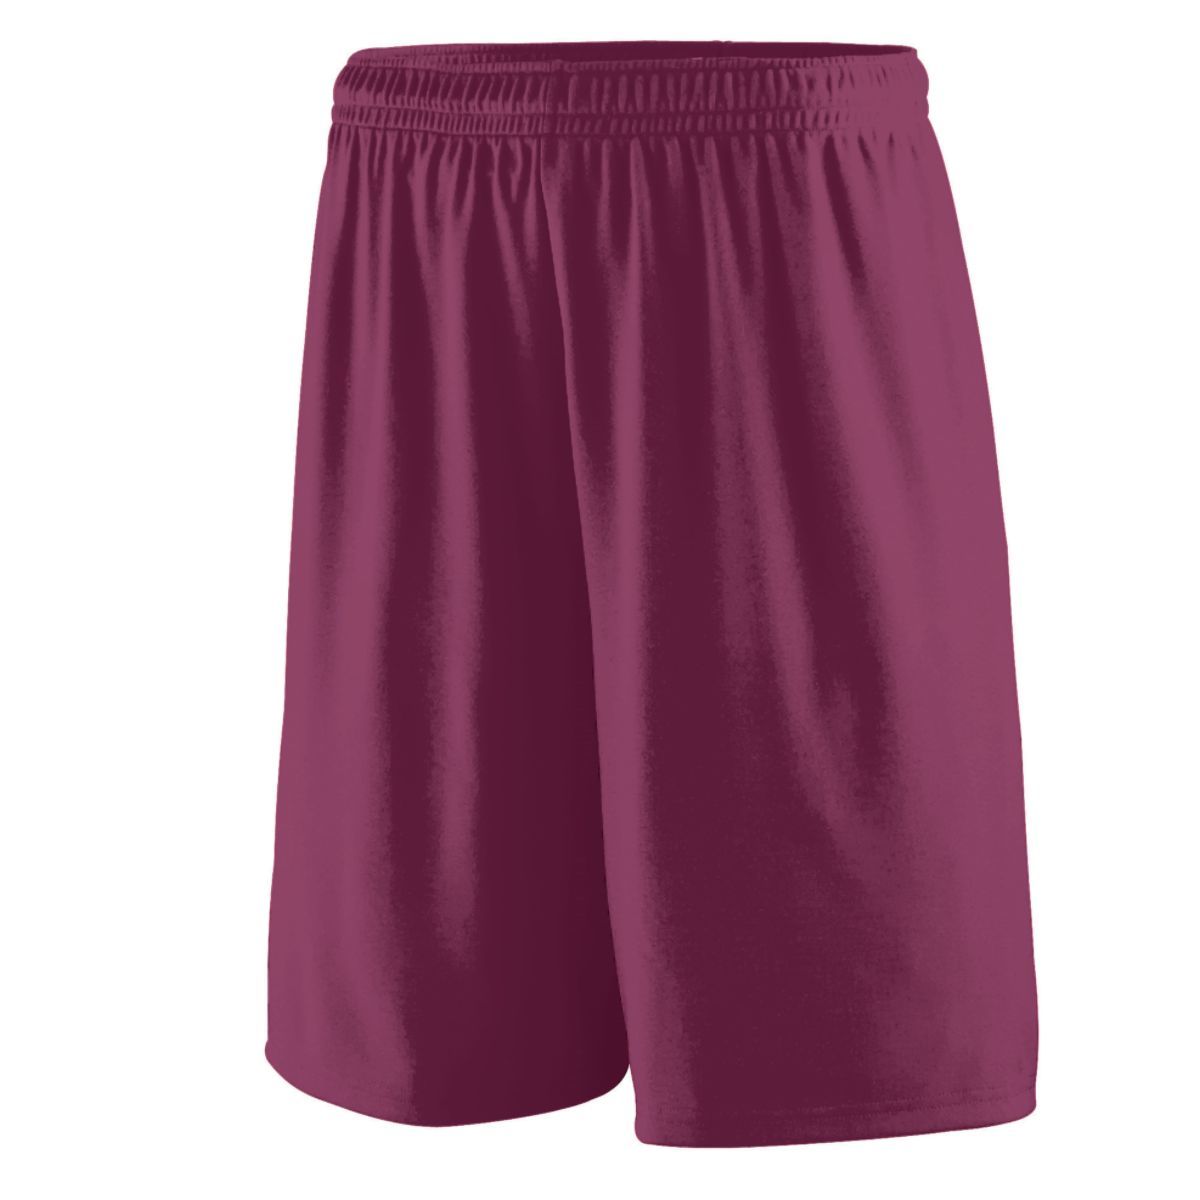 Augusta Sportswear Training Shorts in Maroon  -Part of the Adult, Adult-Shorts, Augusta-Products product lines at KanaleyCreations.com